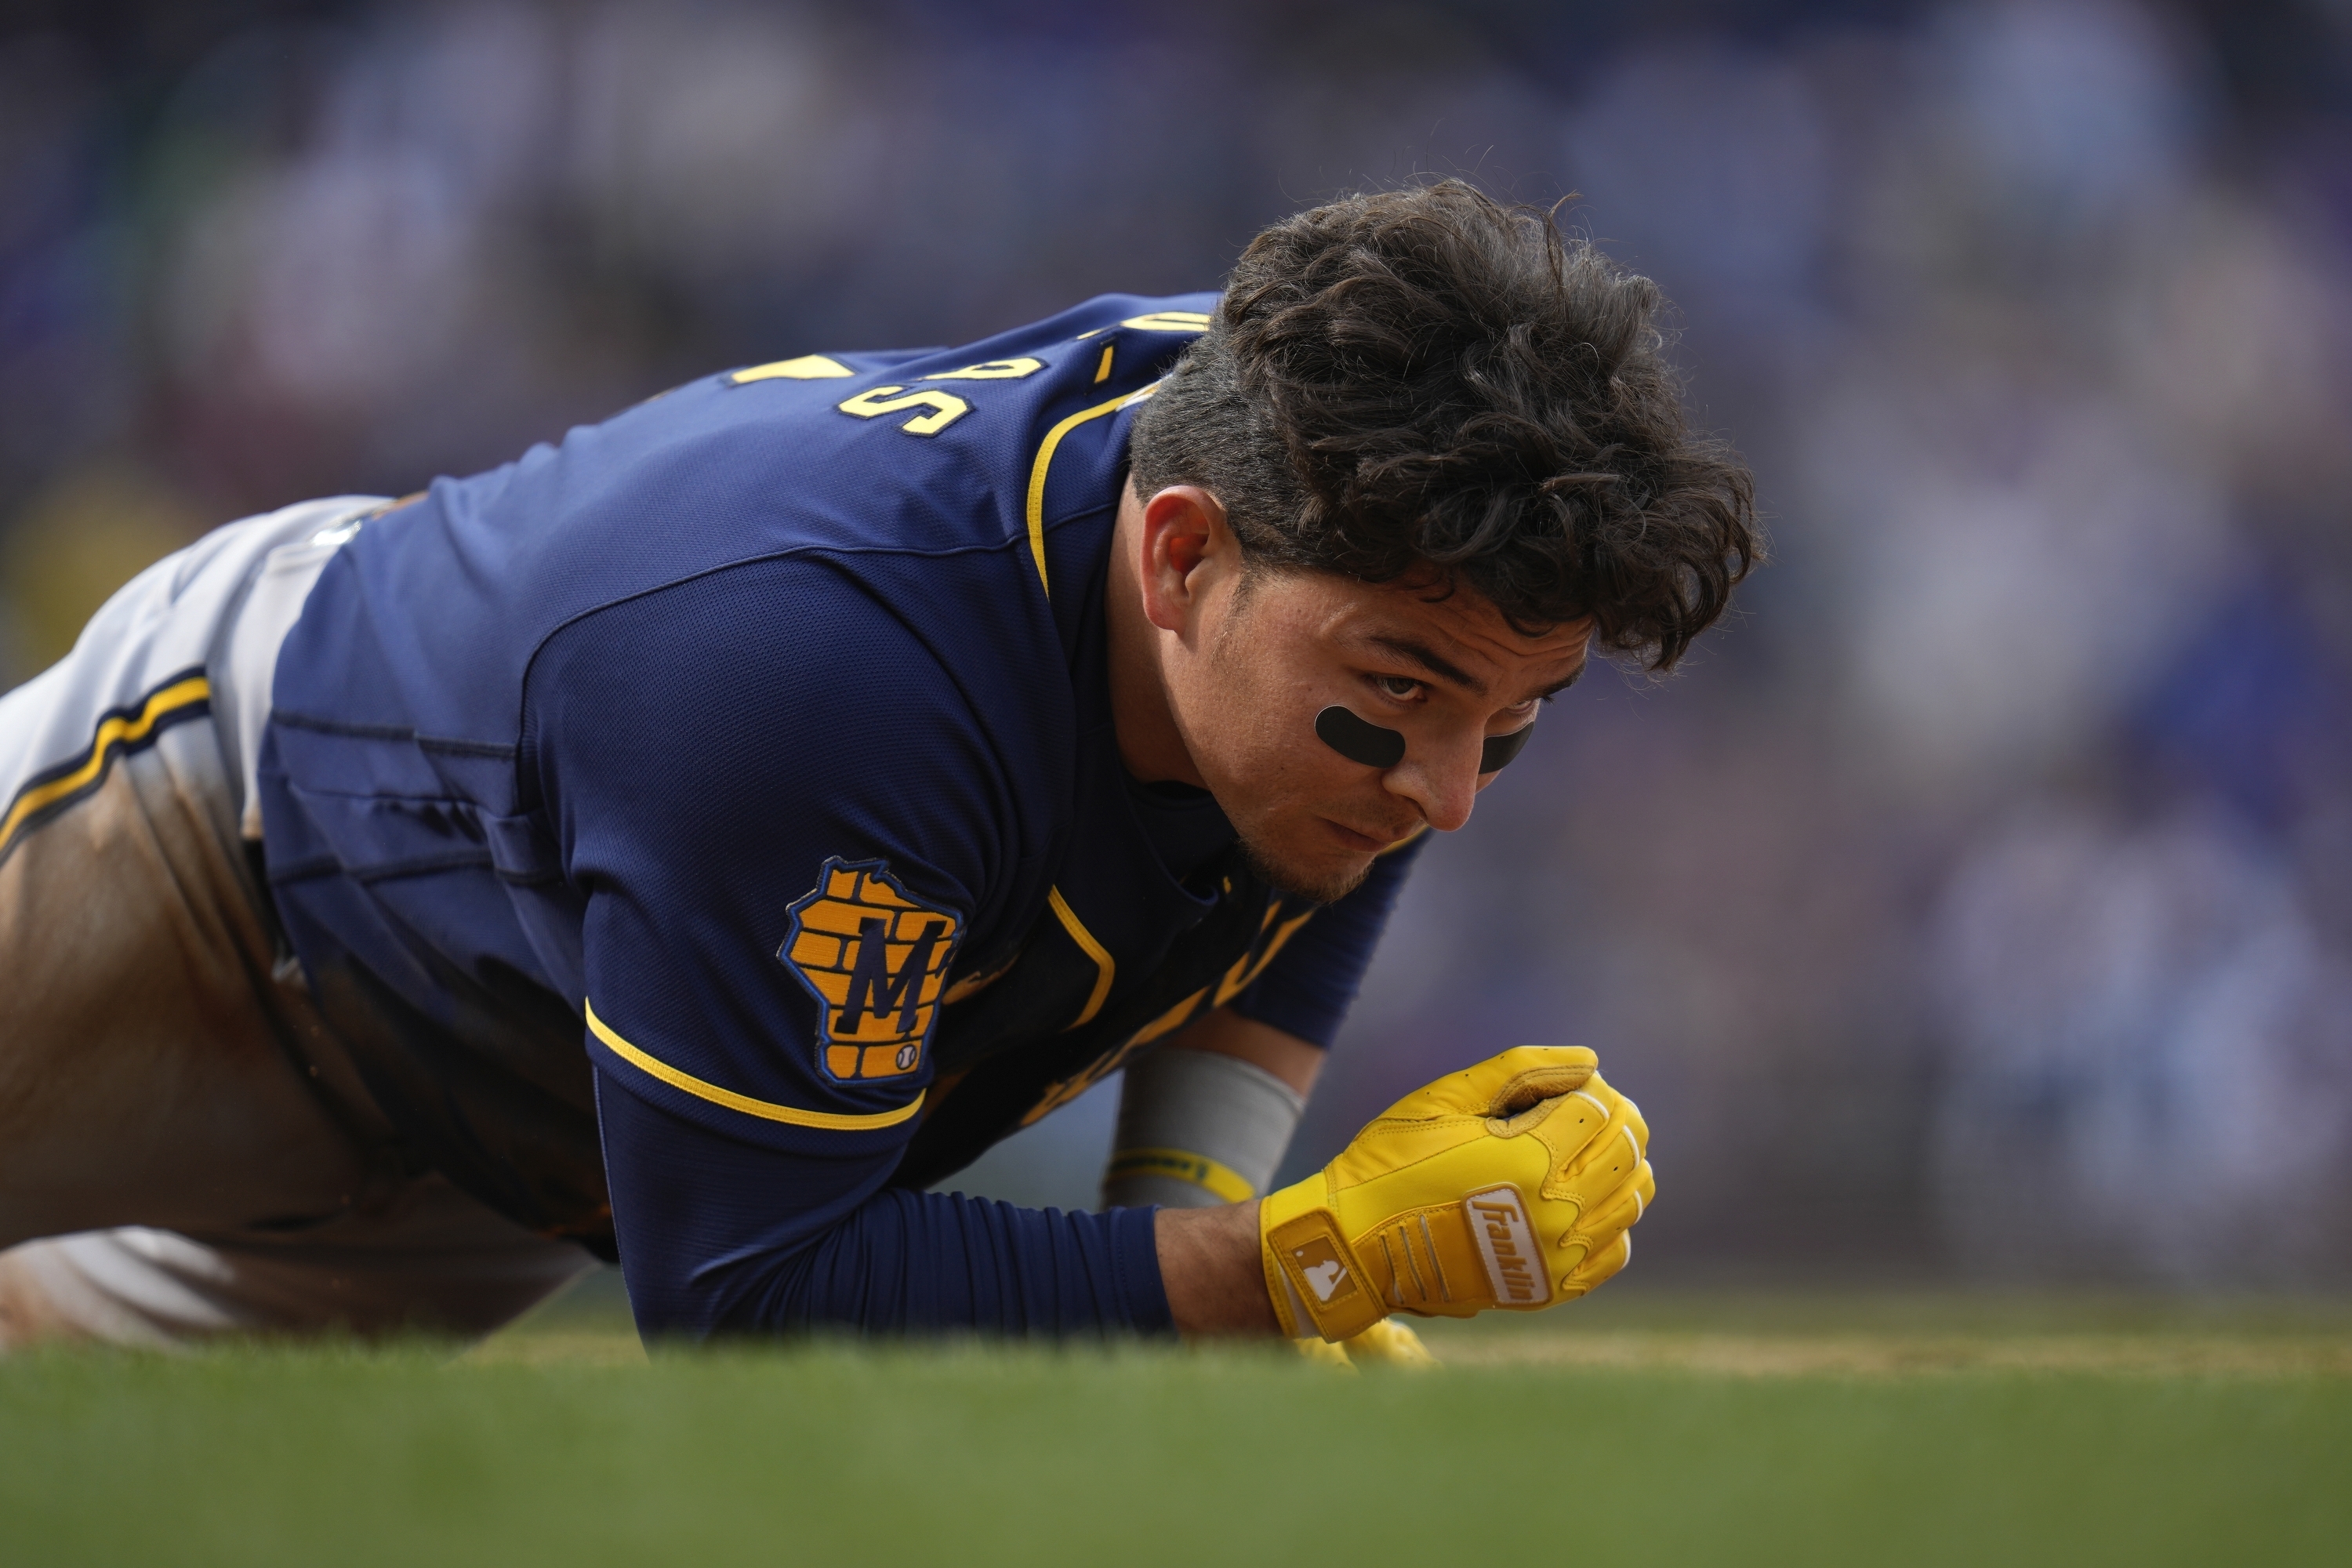 Willy Adames closing in on Brewers record held by Robin Yount